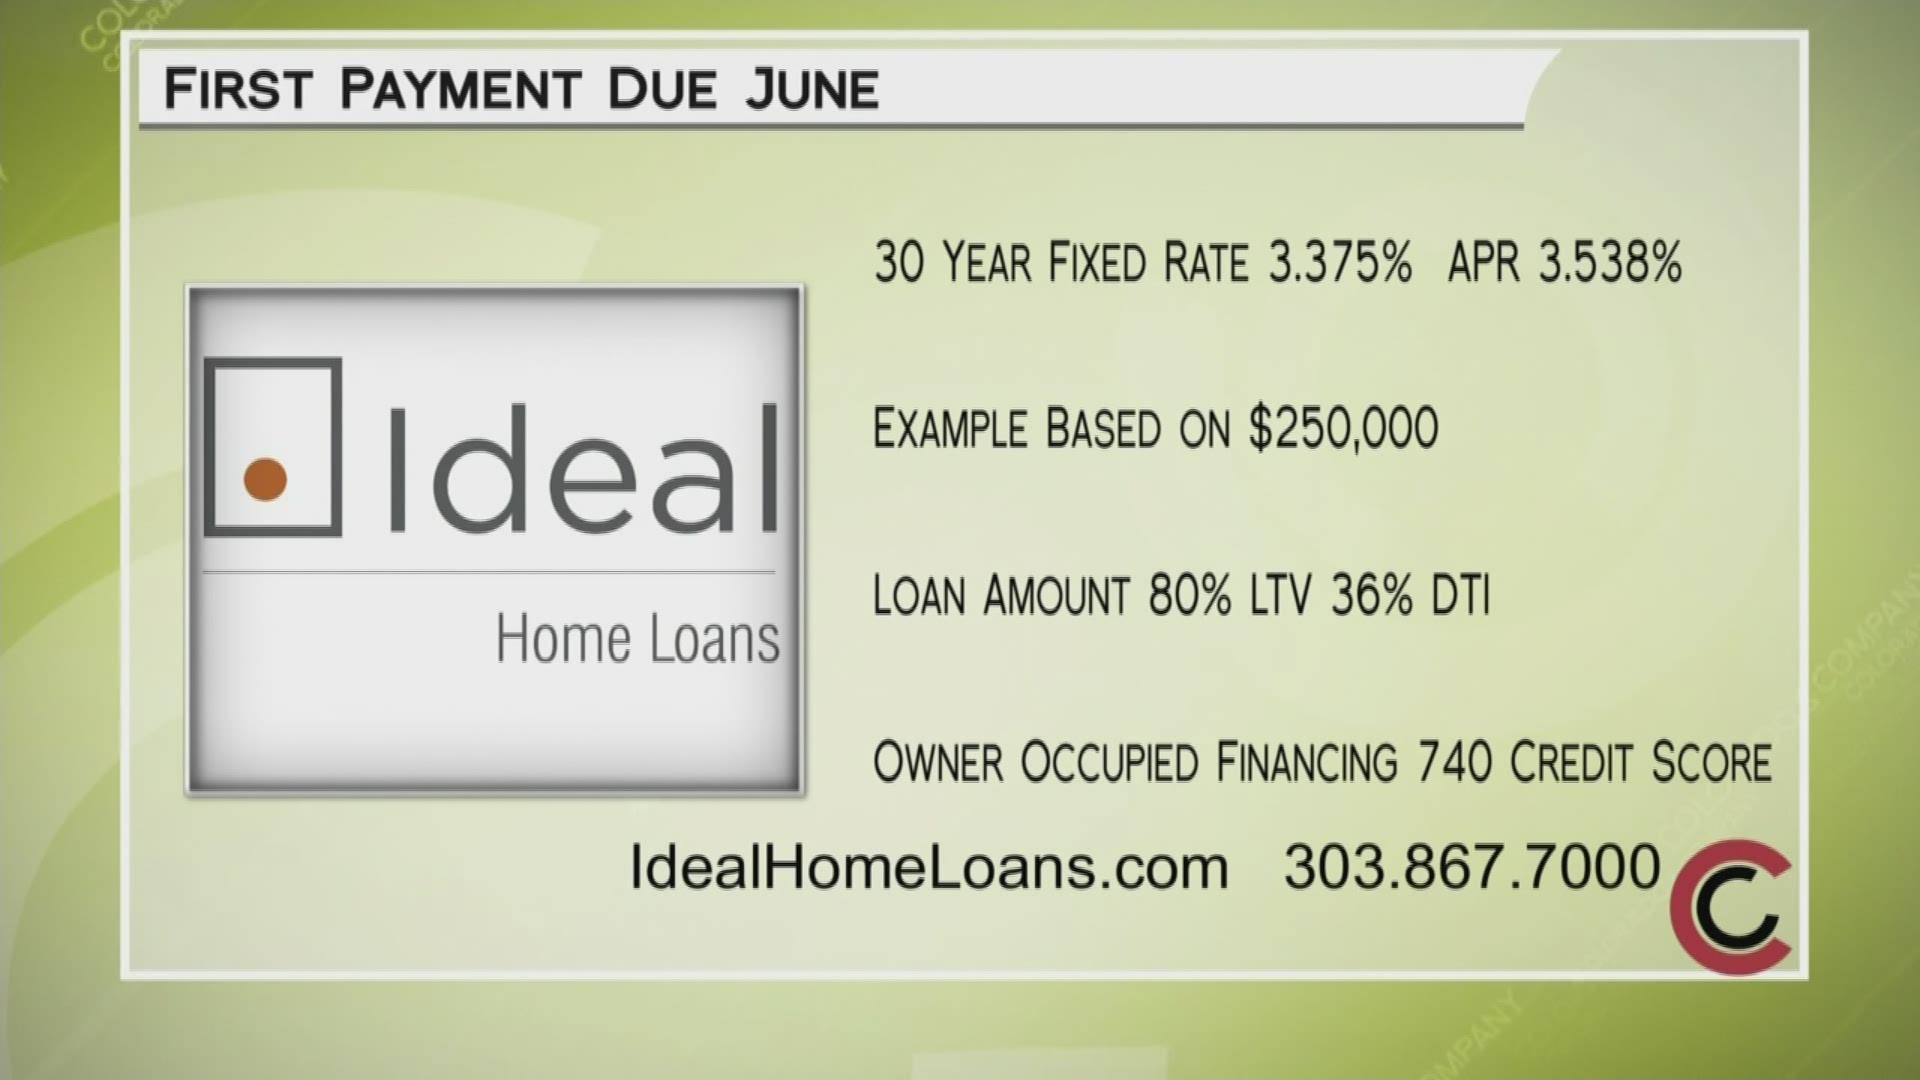 Ideal Home Loans has a free home mortgage consultation. Call 303.867.7000 or visit IdealHomeLoans.com to get started. Your new payment won't be due until June!